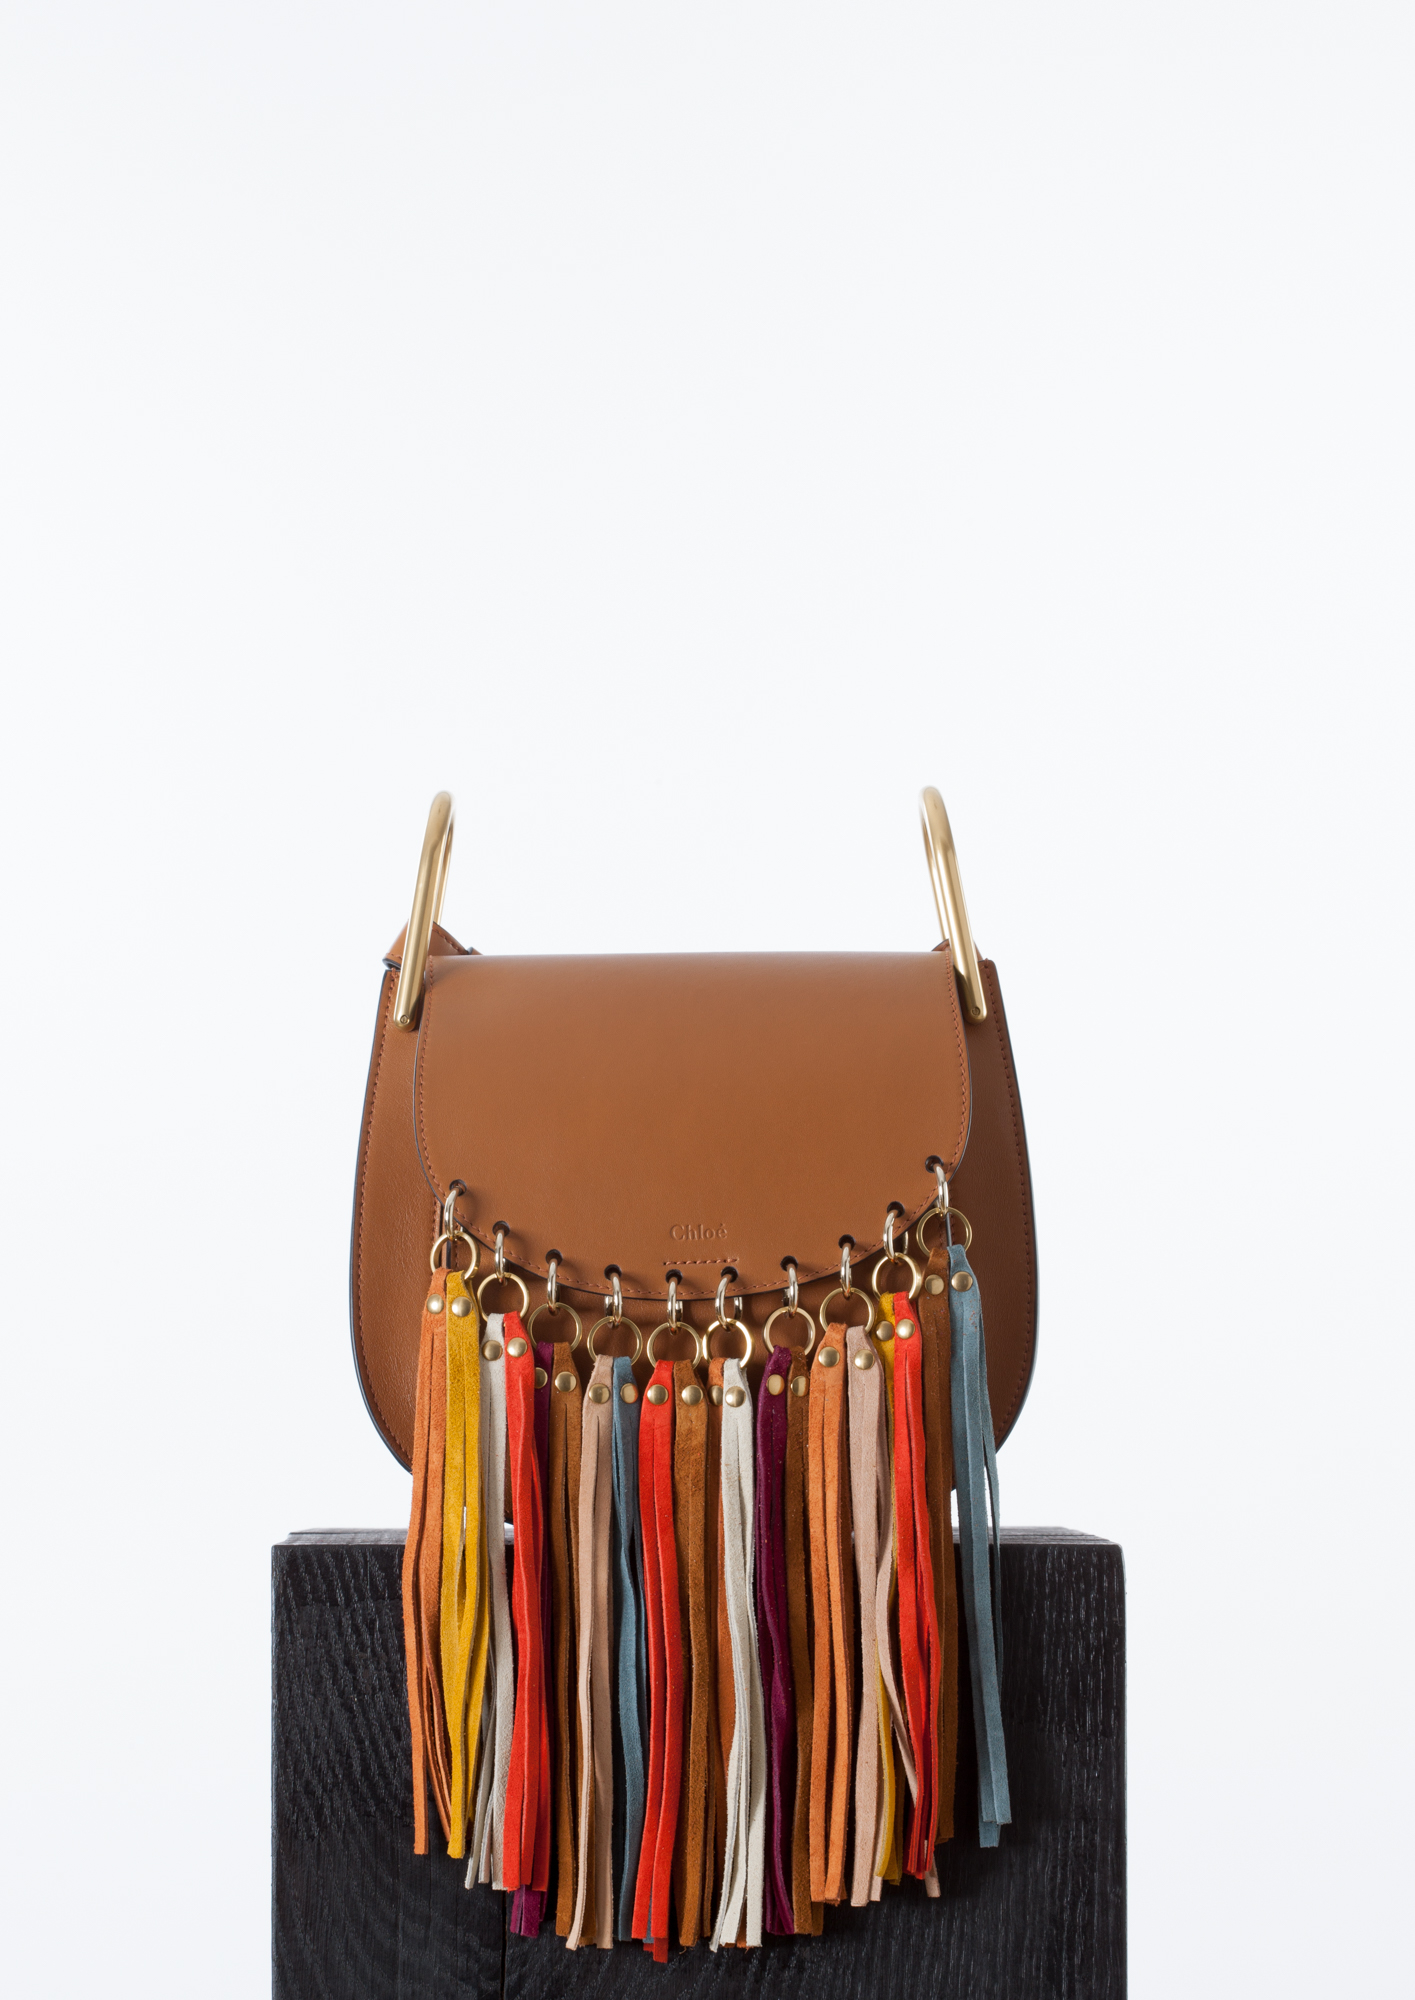 chleo handbags - Chlo Caramel Small Hudson Bag With Multicolor Fringes in Brown ...